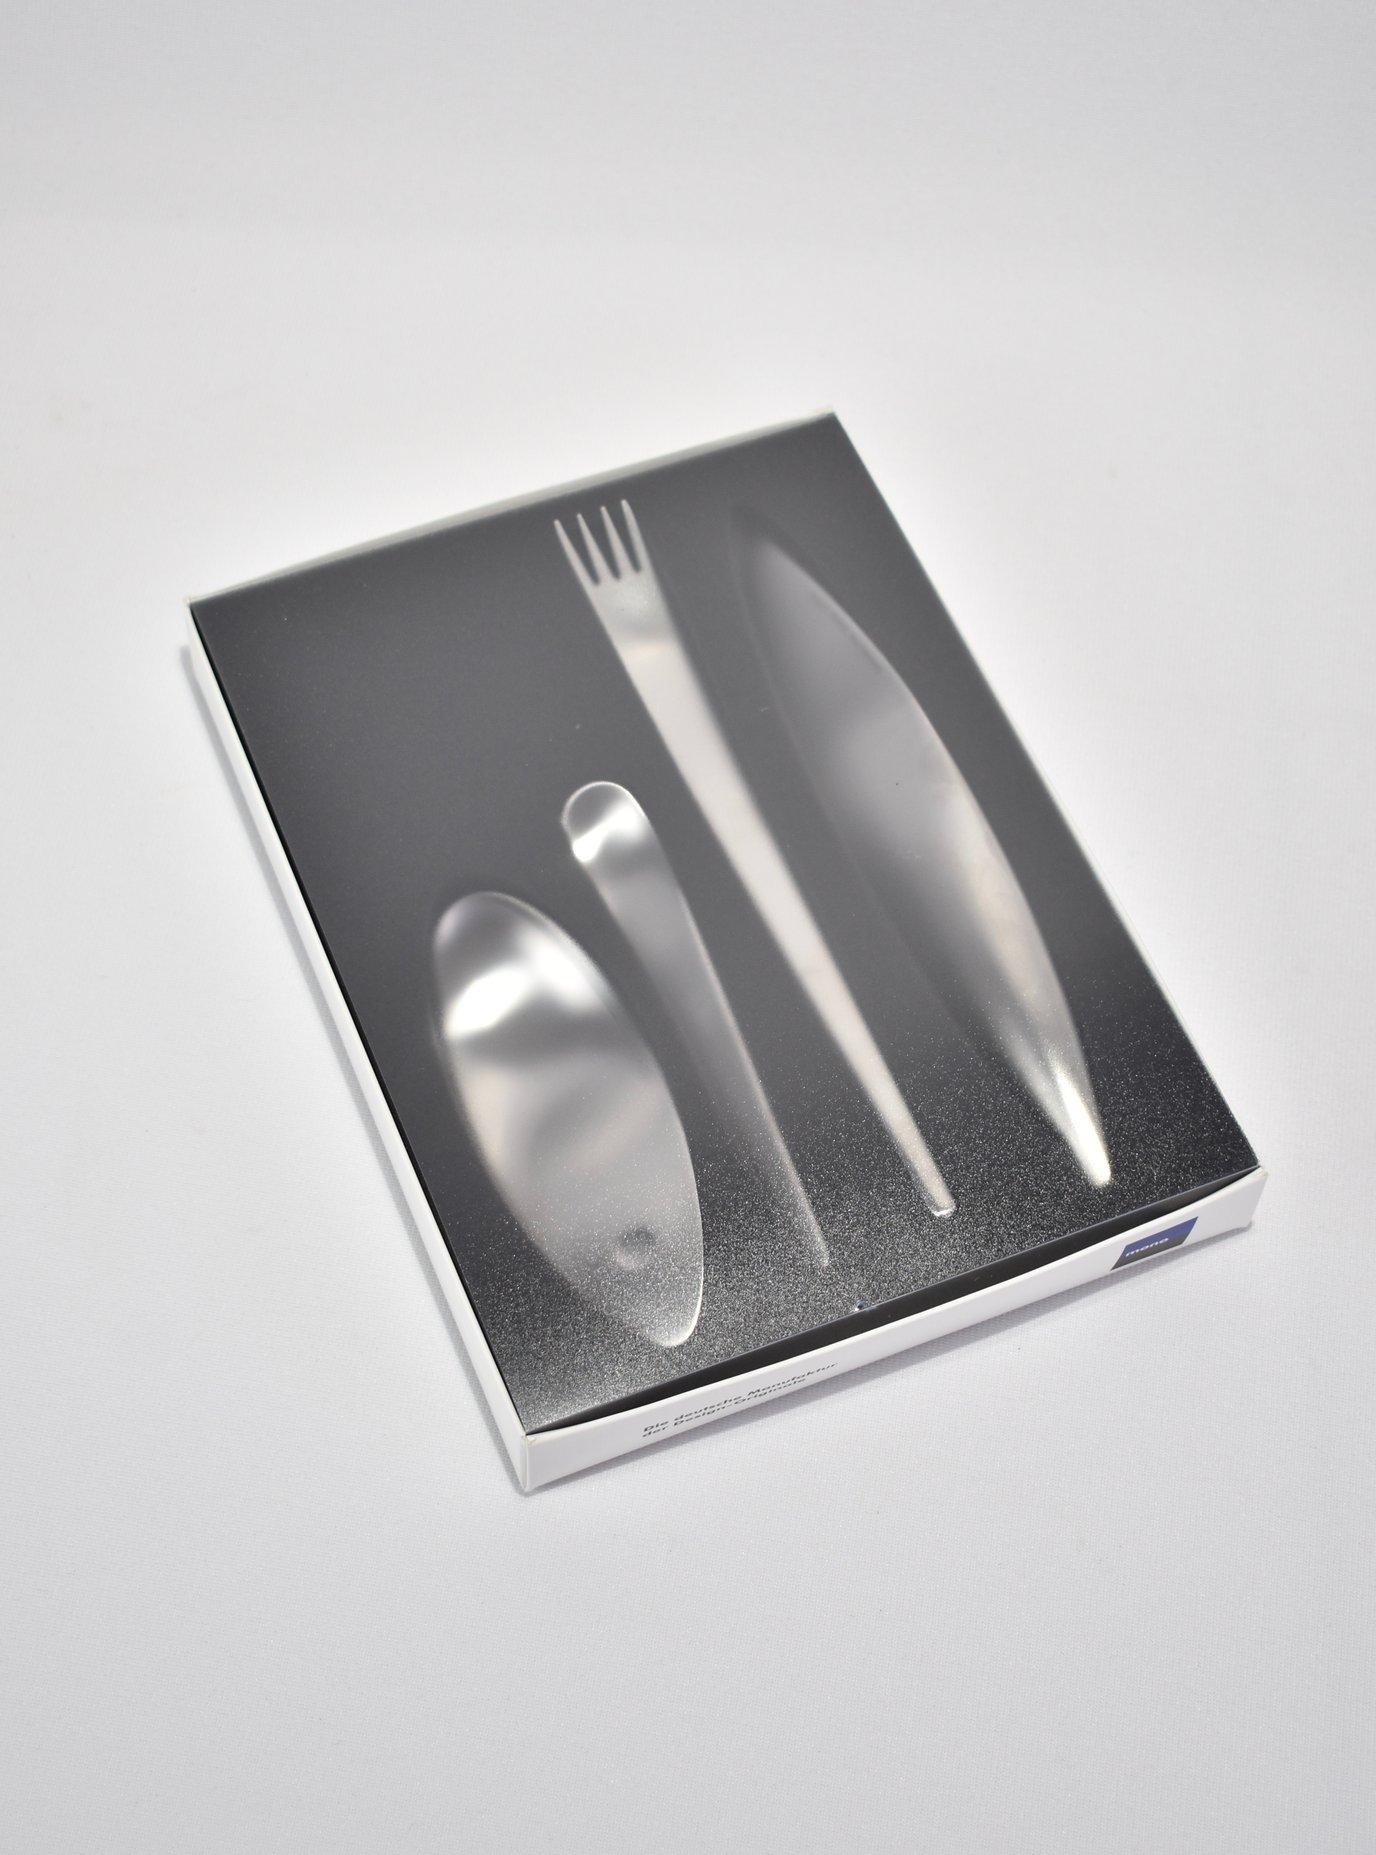 Stunning 4-piece flatware set designed to inspire a primal dining experience. The hand ax inspired the knife, the elongated fork is reminiscent of early skewing tools, and the spoon recalls a cupping hand. Designed by Michael Schneider in 1995, the